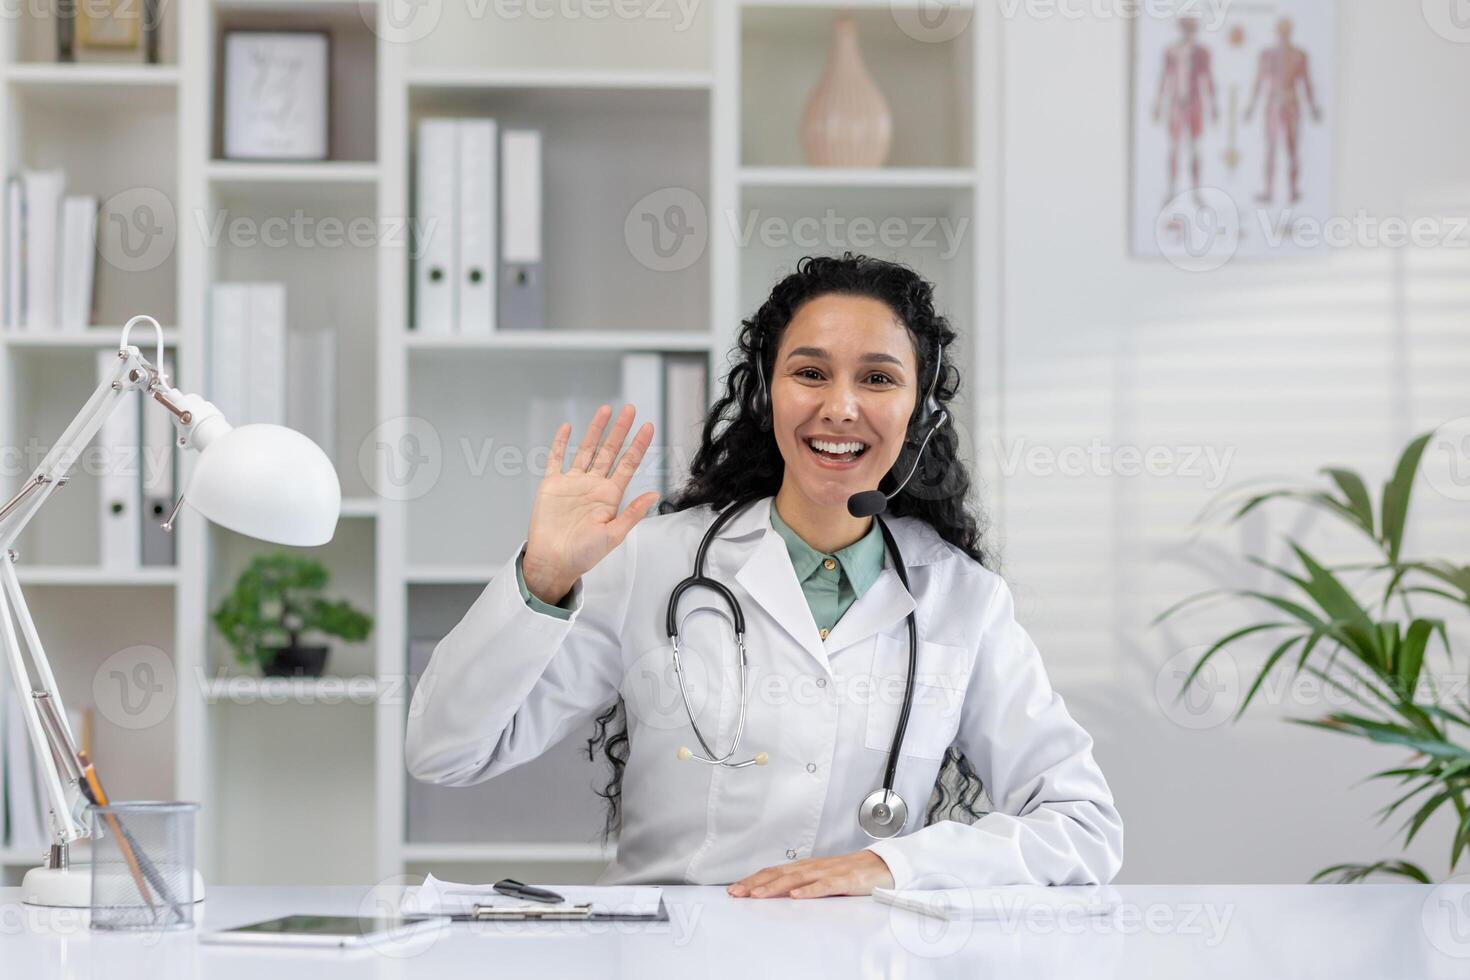 A cheerful female physician engaging in a call, waving to the camera from her office, equipped with medical literature and plants. photo